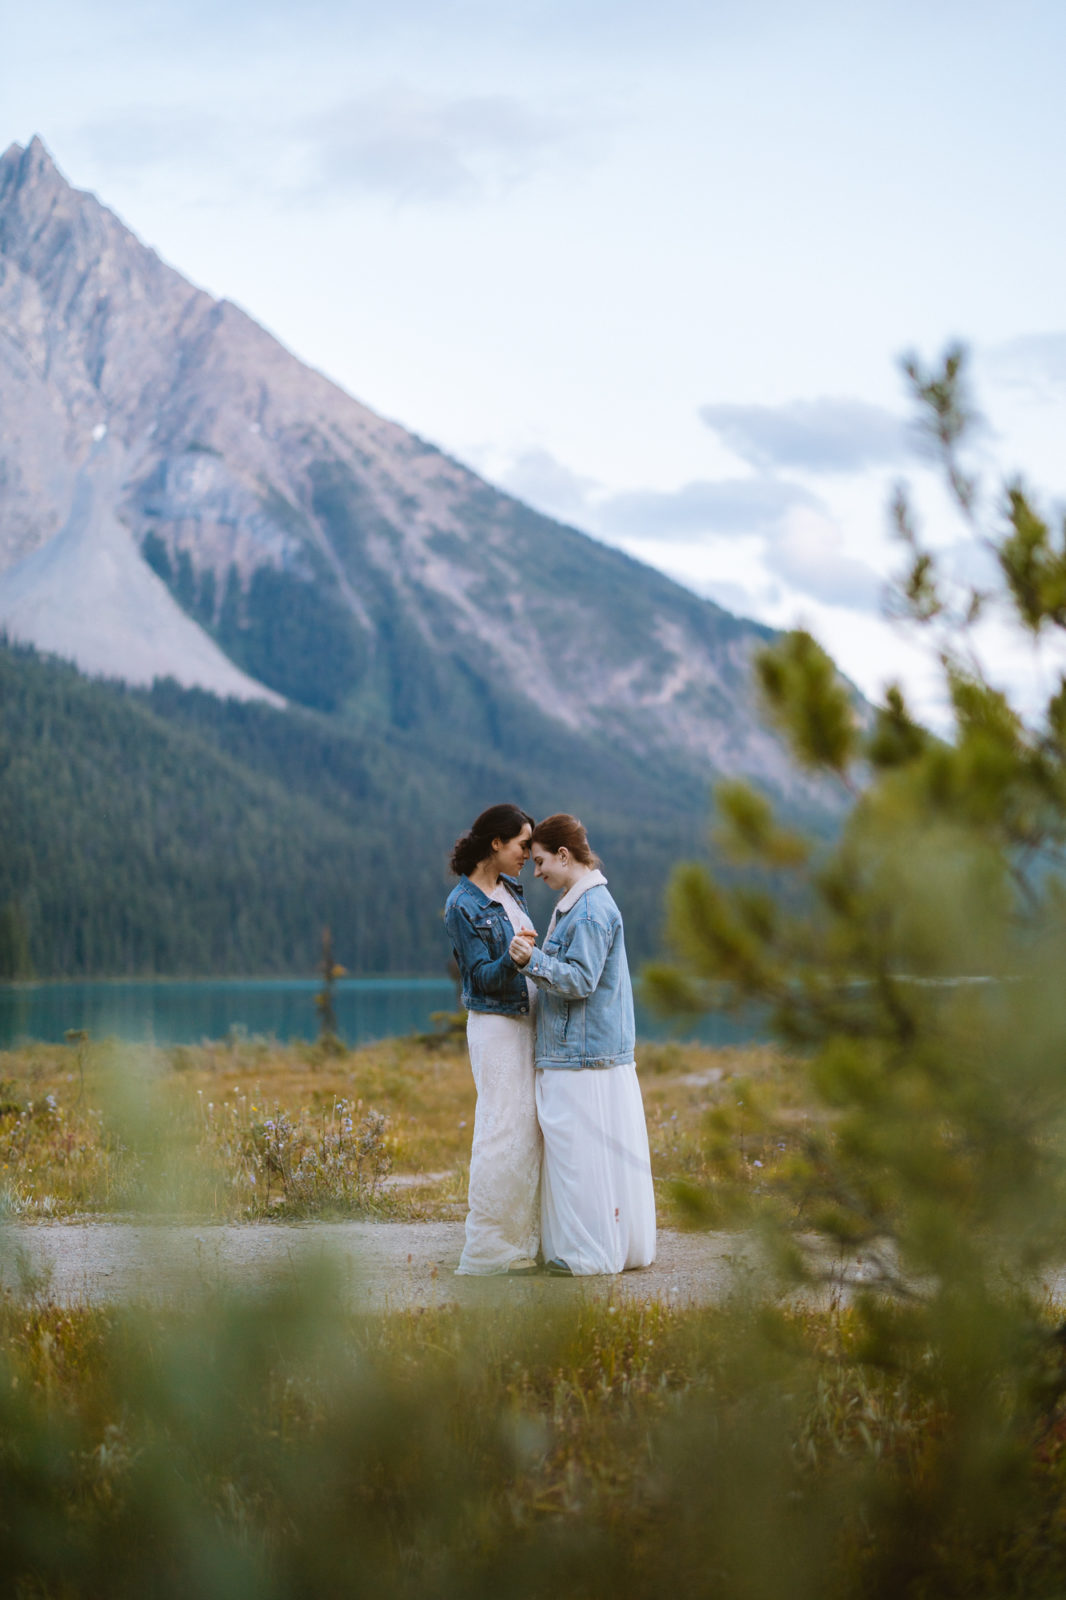 Newly wed couple shares a romantic moment with the mountains of Yoho National Park in the background